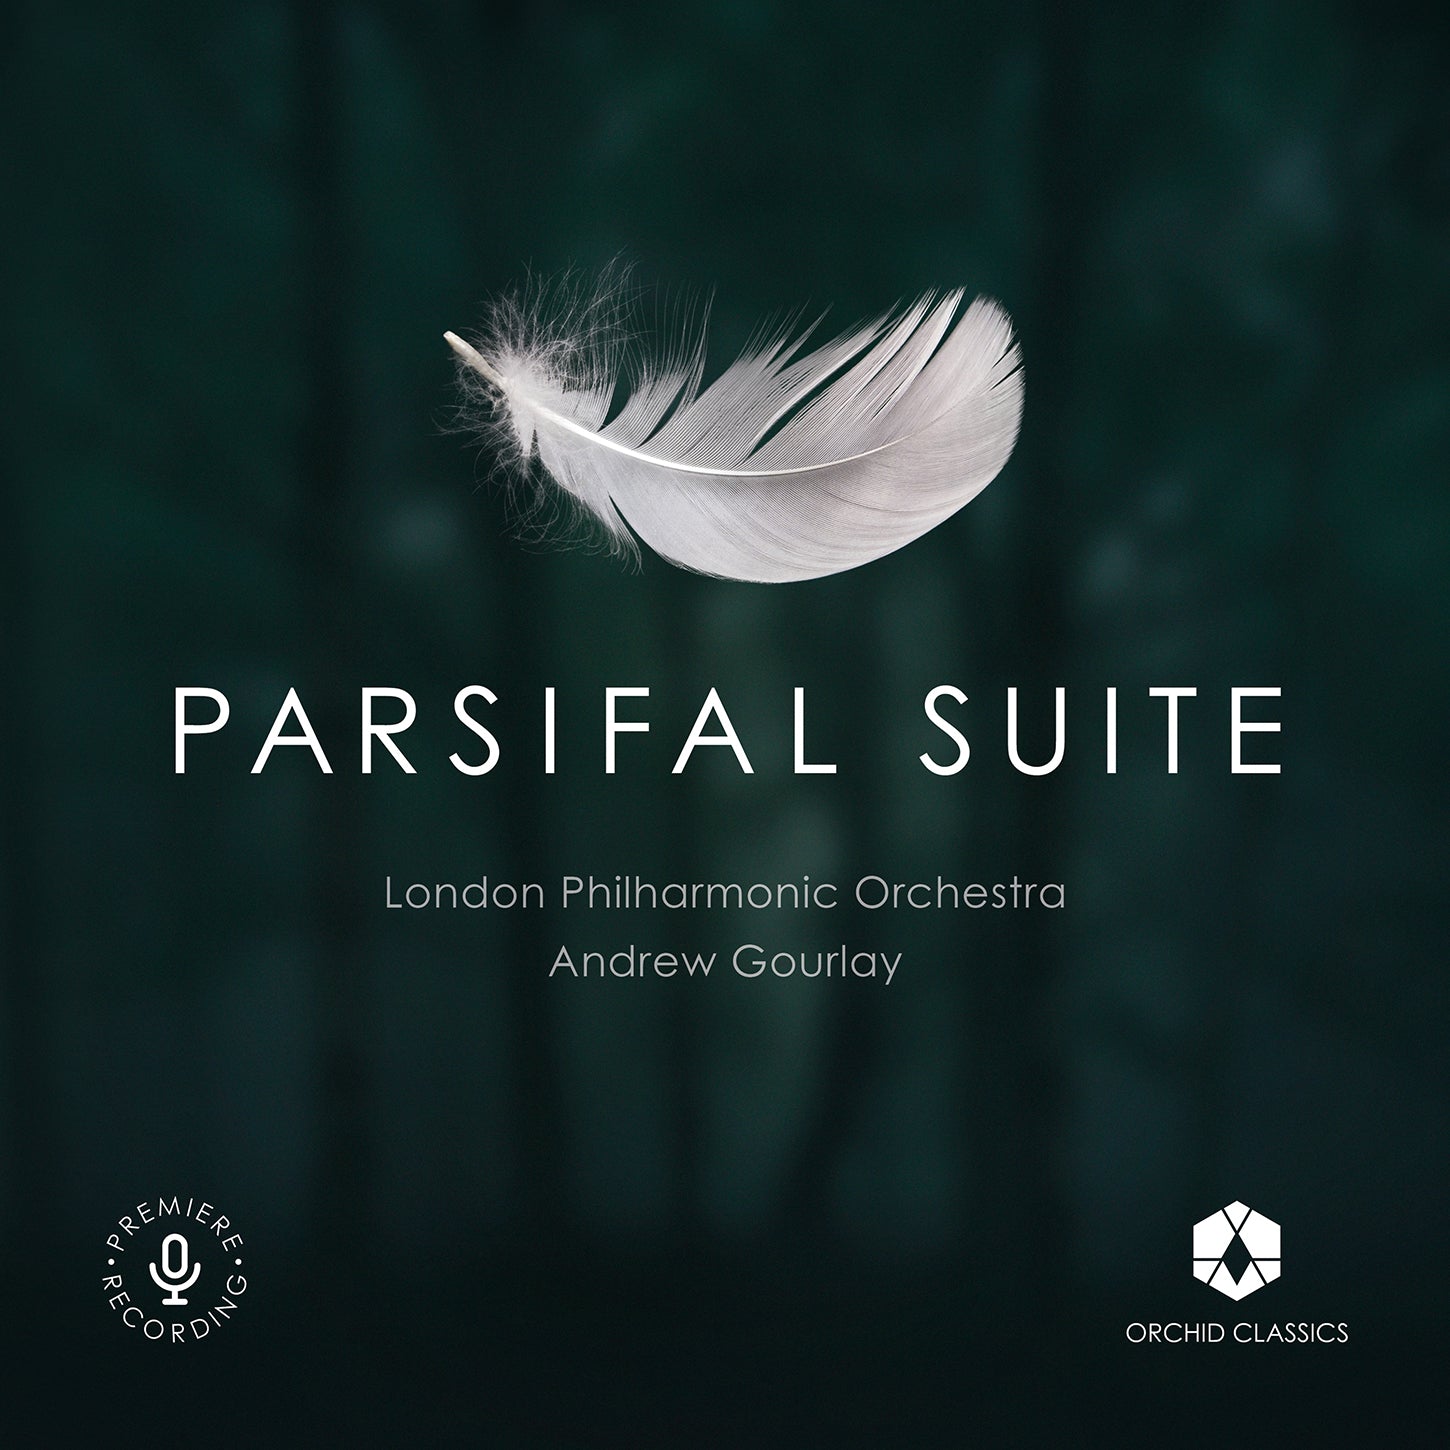 Wagner: Parsifal Suite / Gourlay, London Philharmonic Orchestra